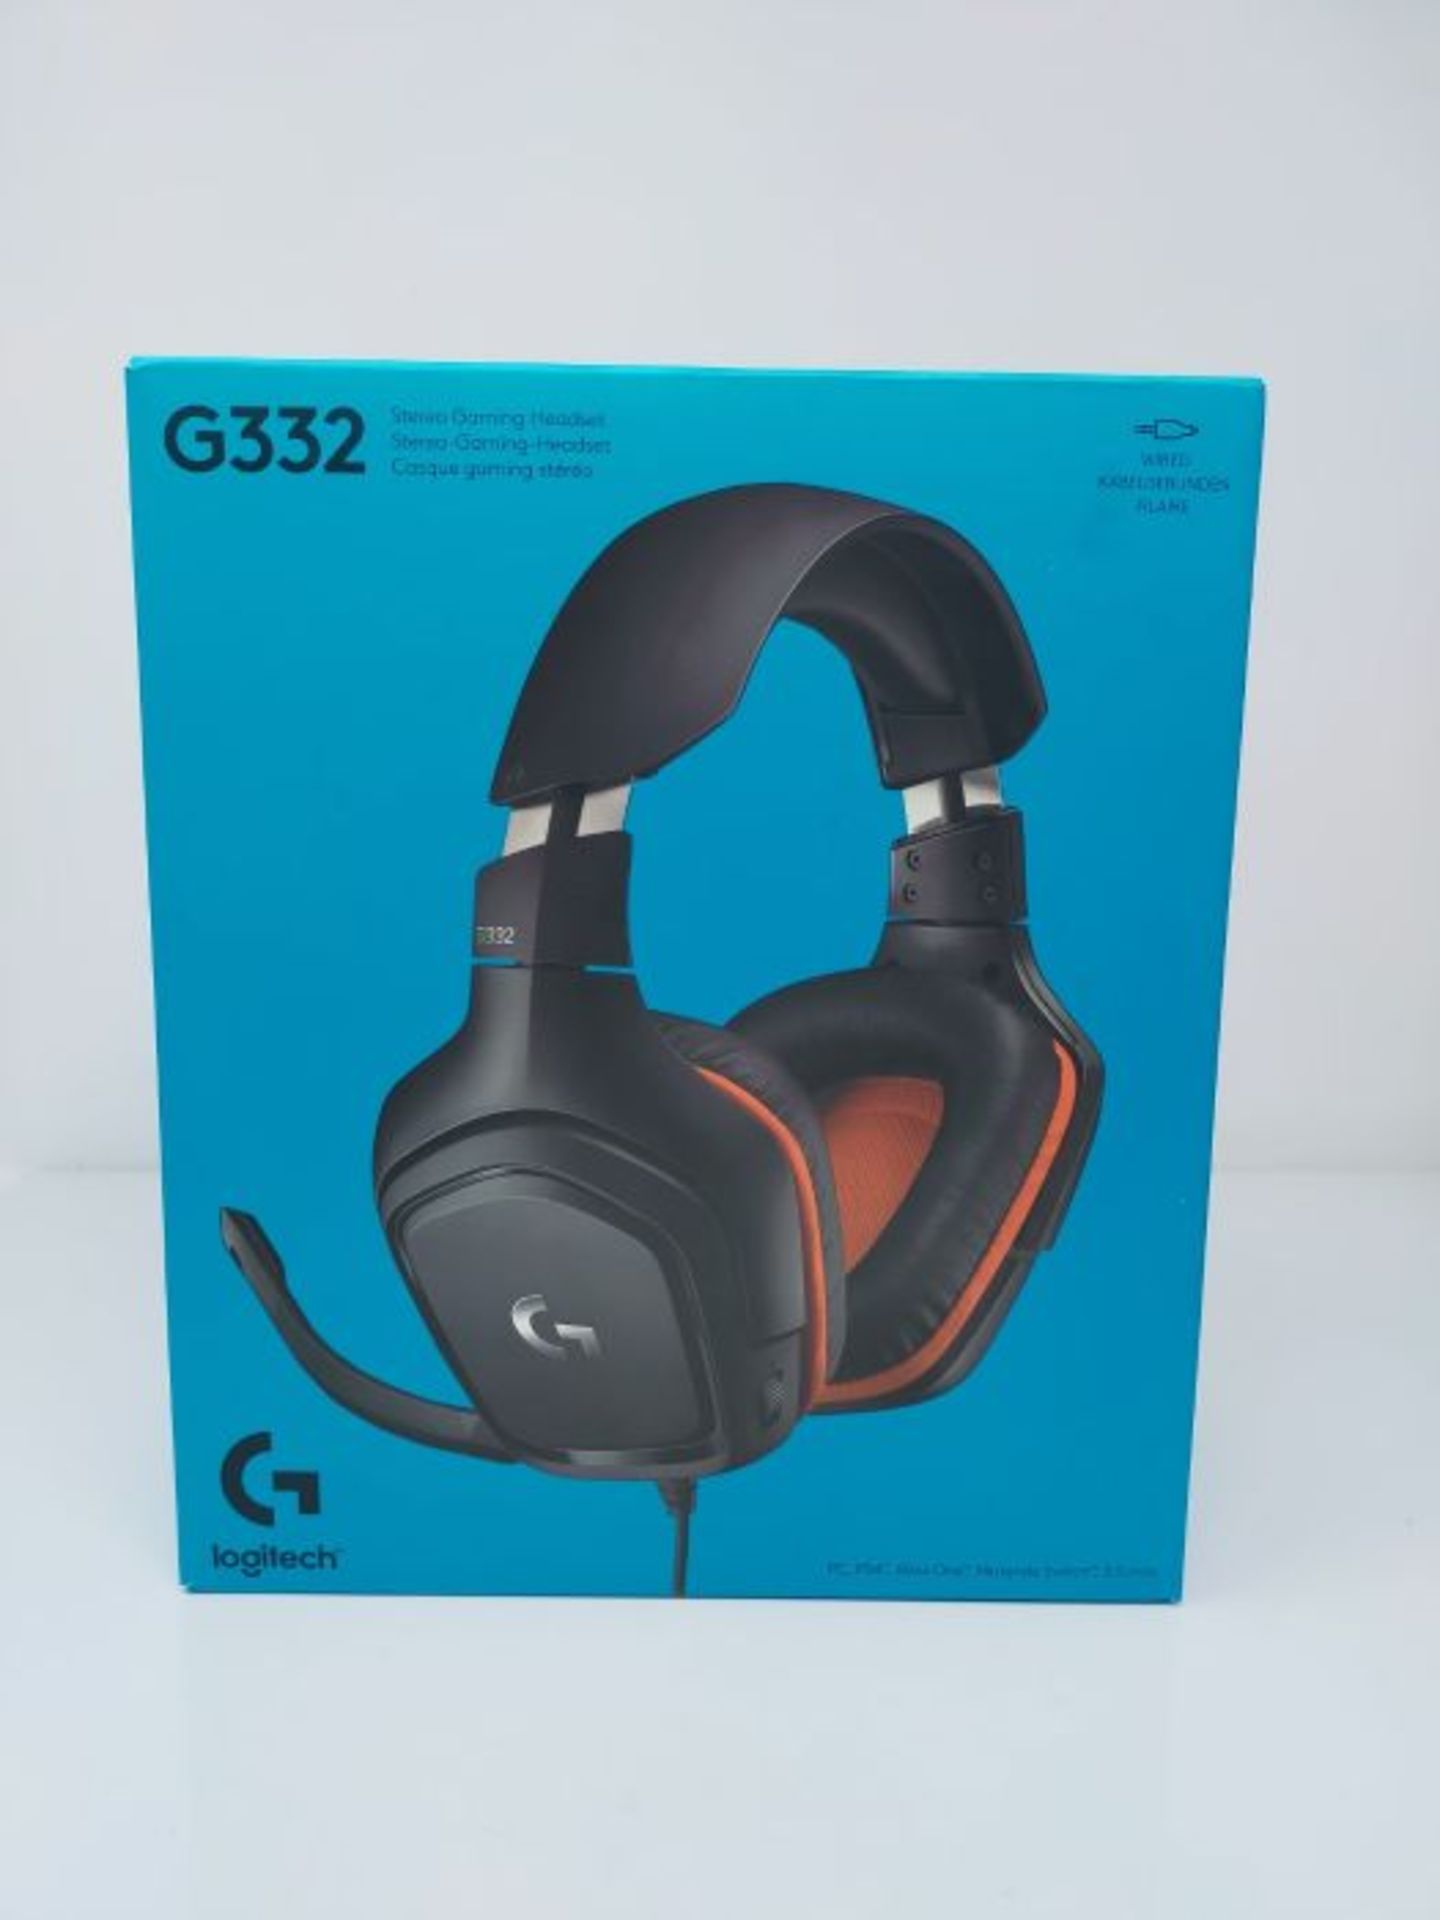 Logitech G332 Wired Gaming Headset, 50 mm Audio Drivers, Rotating Leatherette Ear Cups - Image 2 of 3